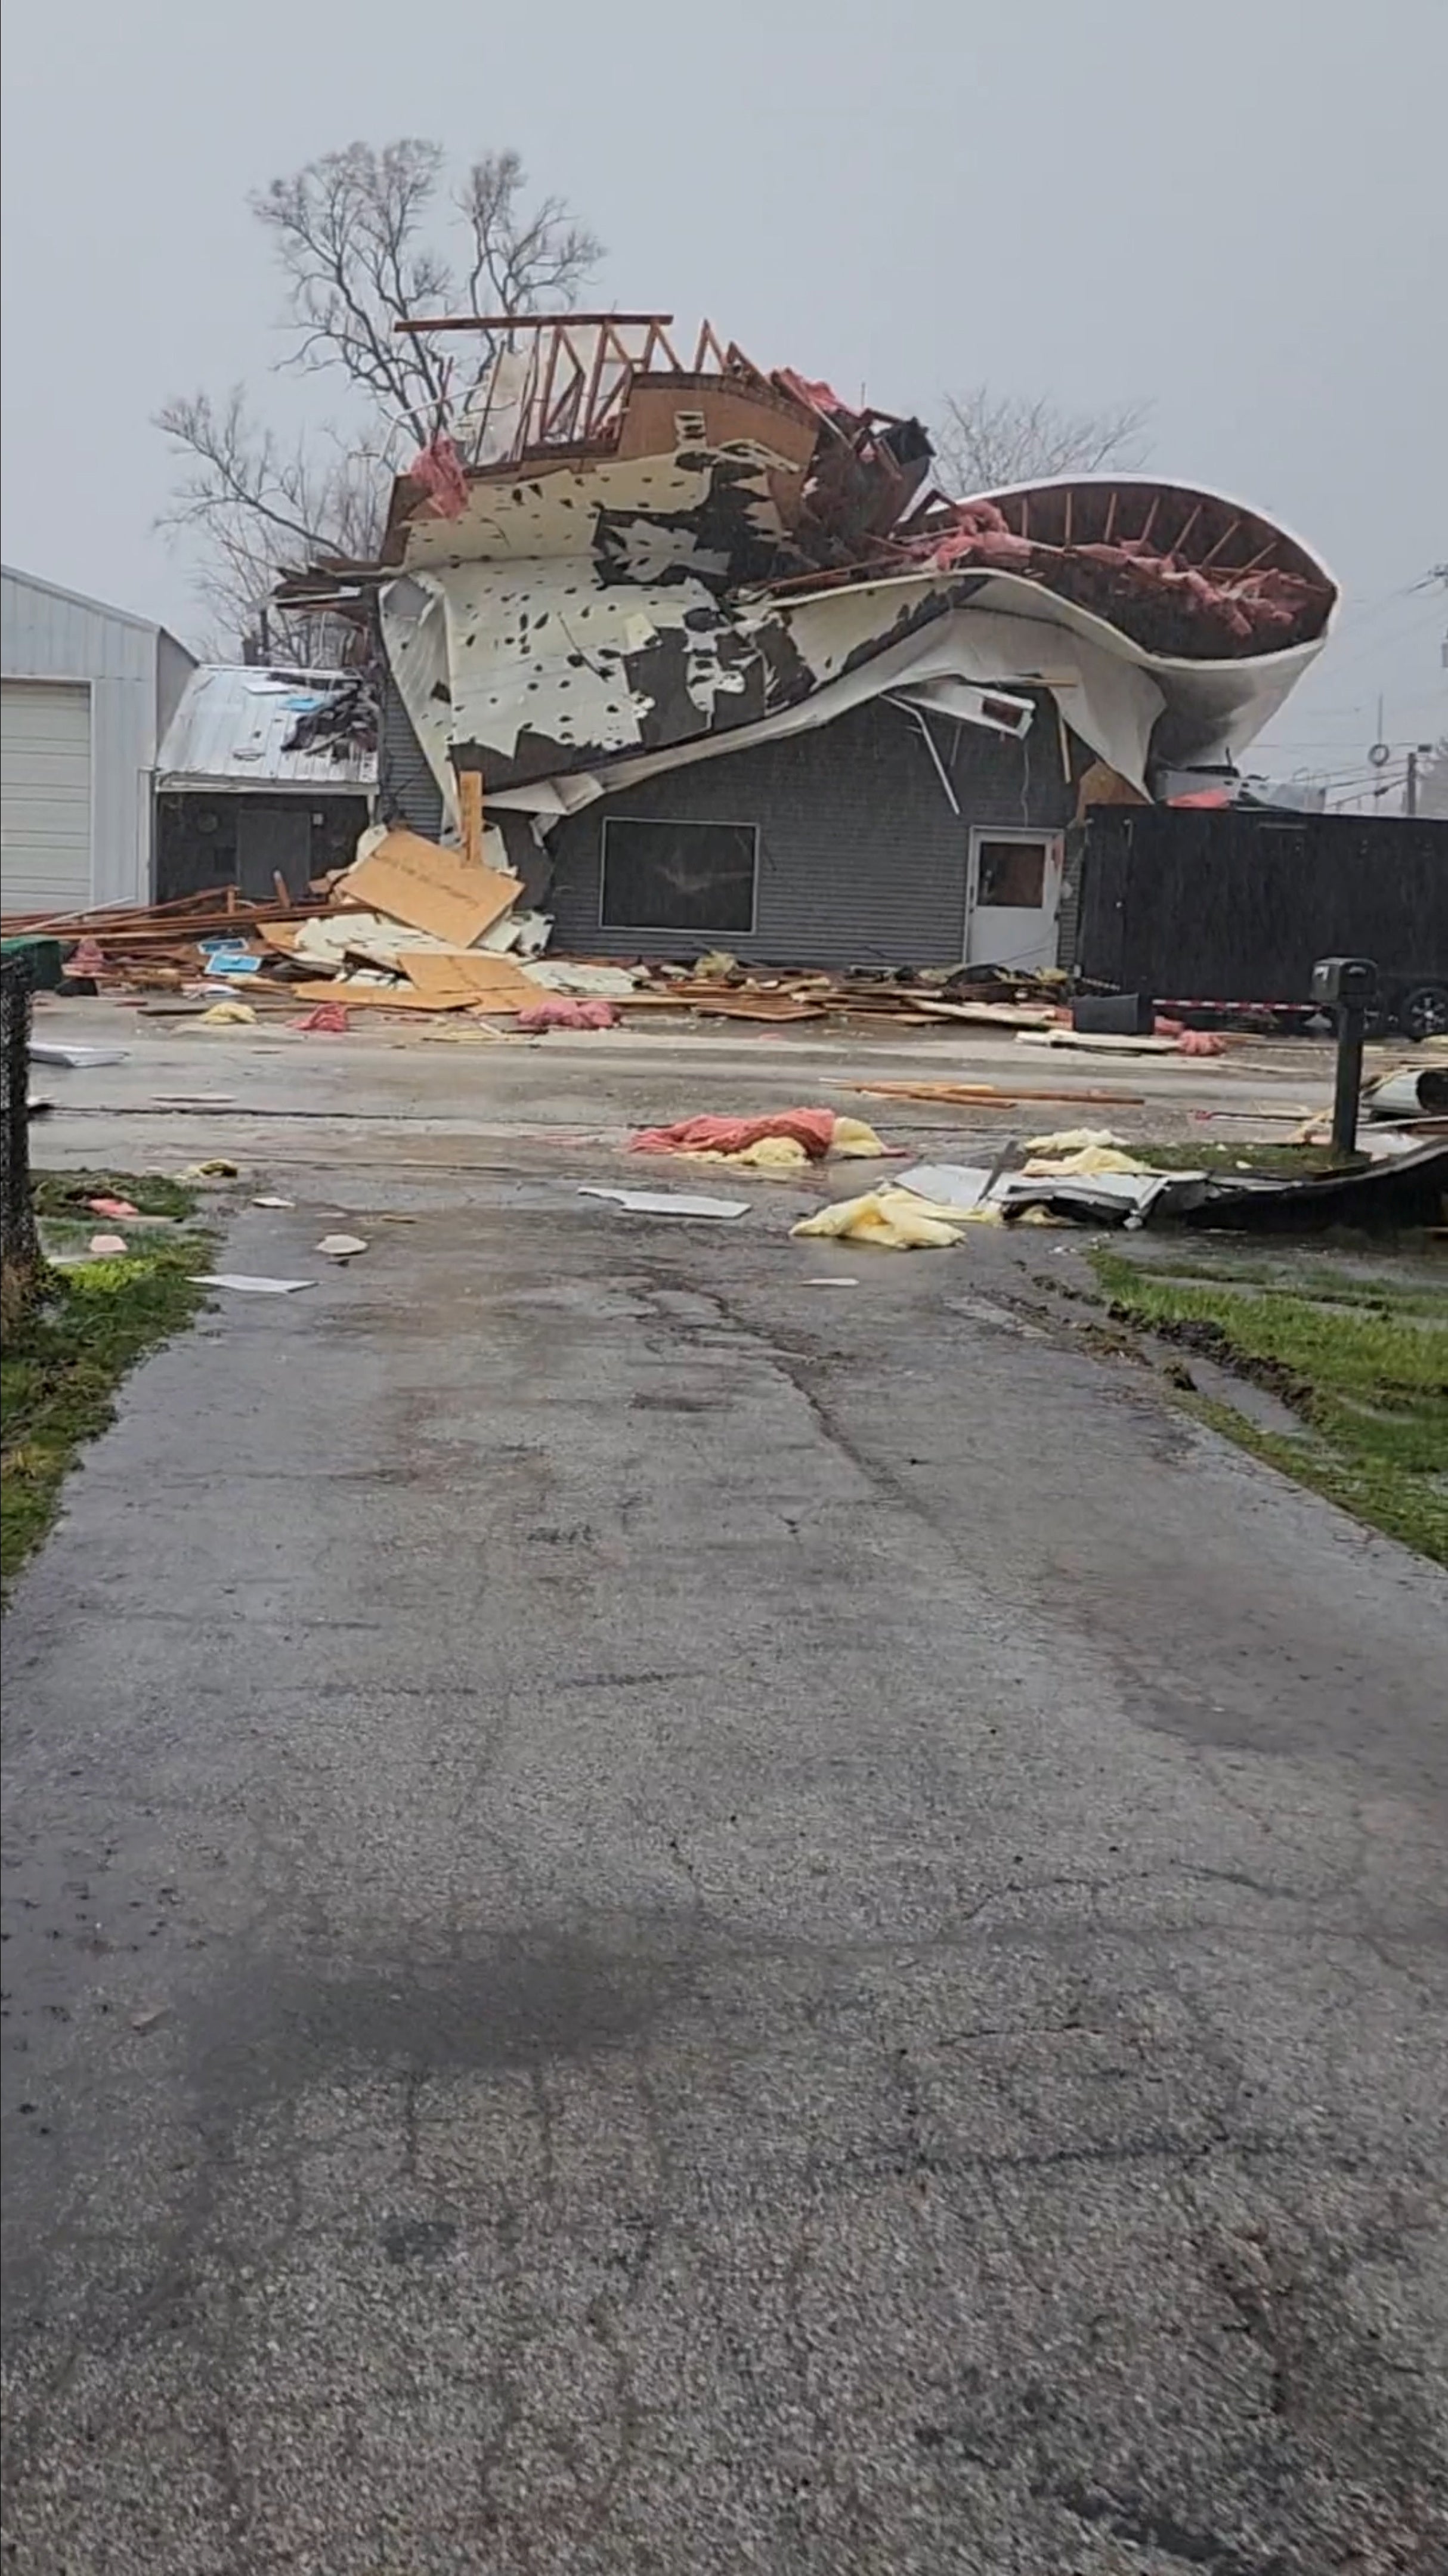 A view of damage to a building caused by a tornado, in Colona, Illinois on 4th April